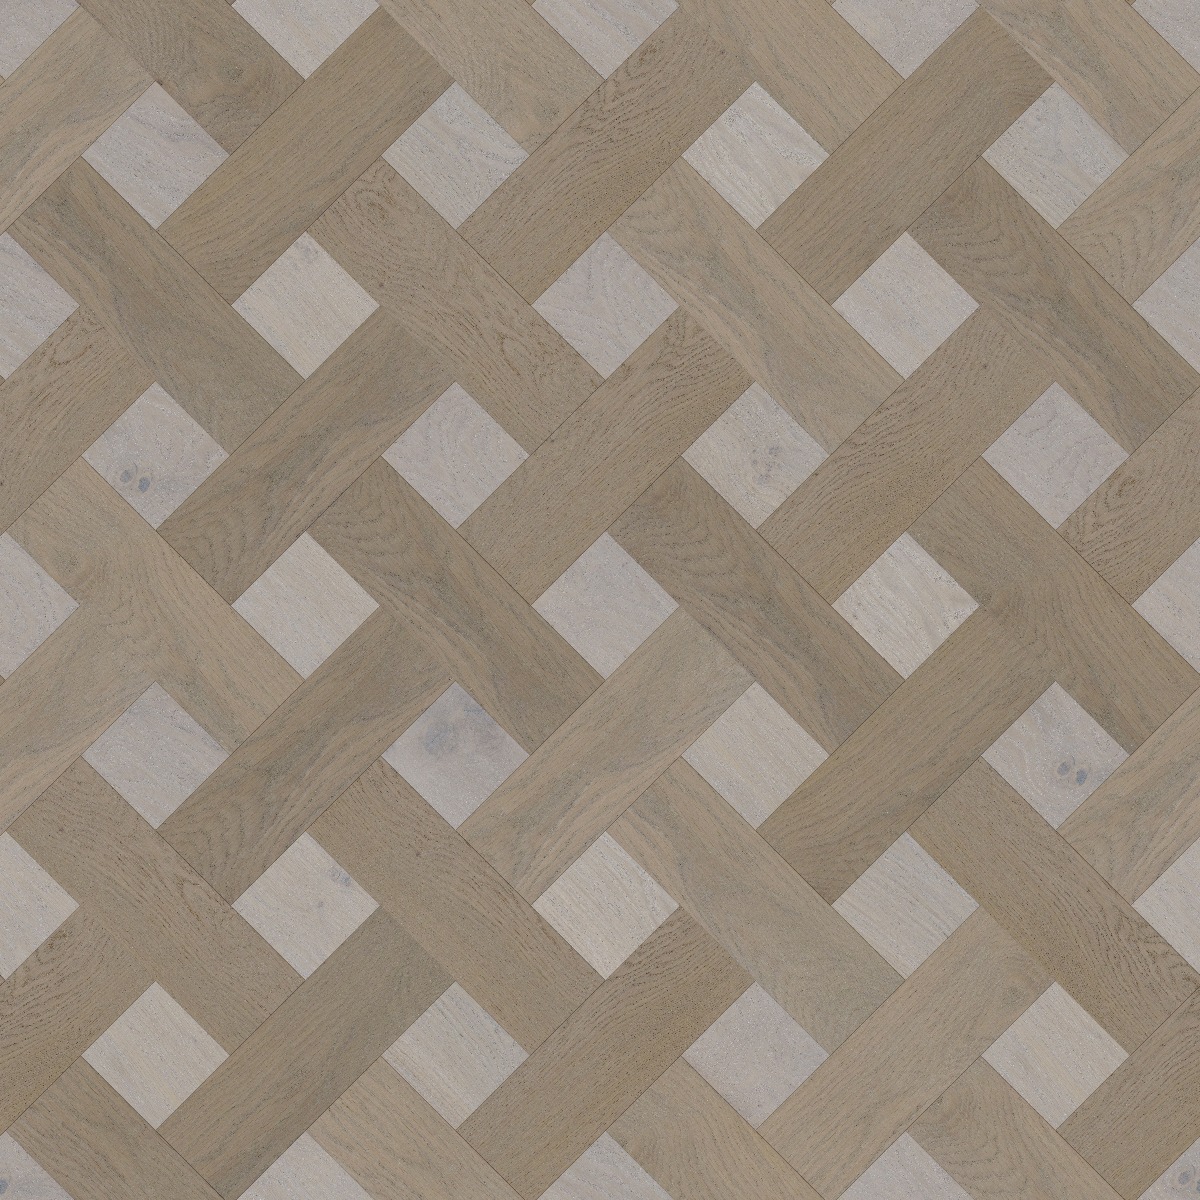 A seamless wood texture with creative 4230 select grade boards arranged in a Lattice Weave pattern